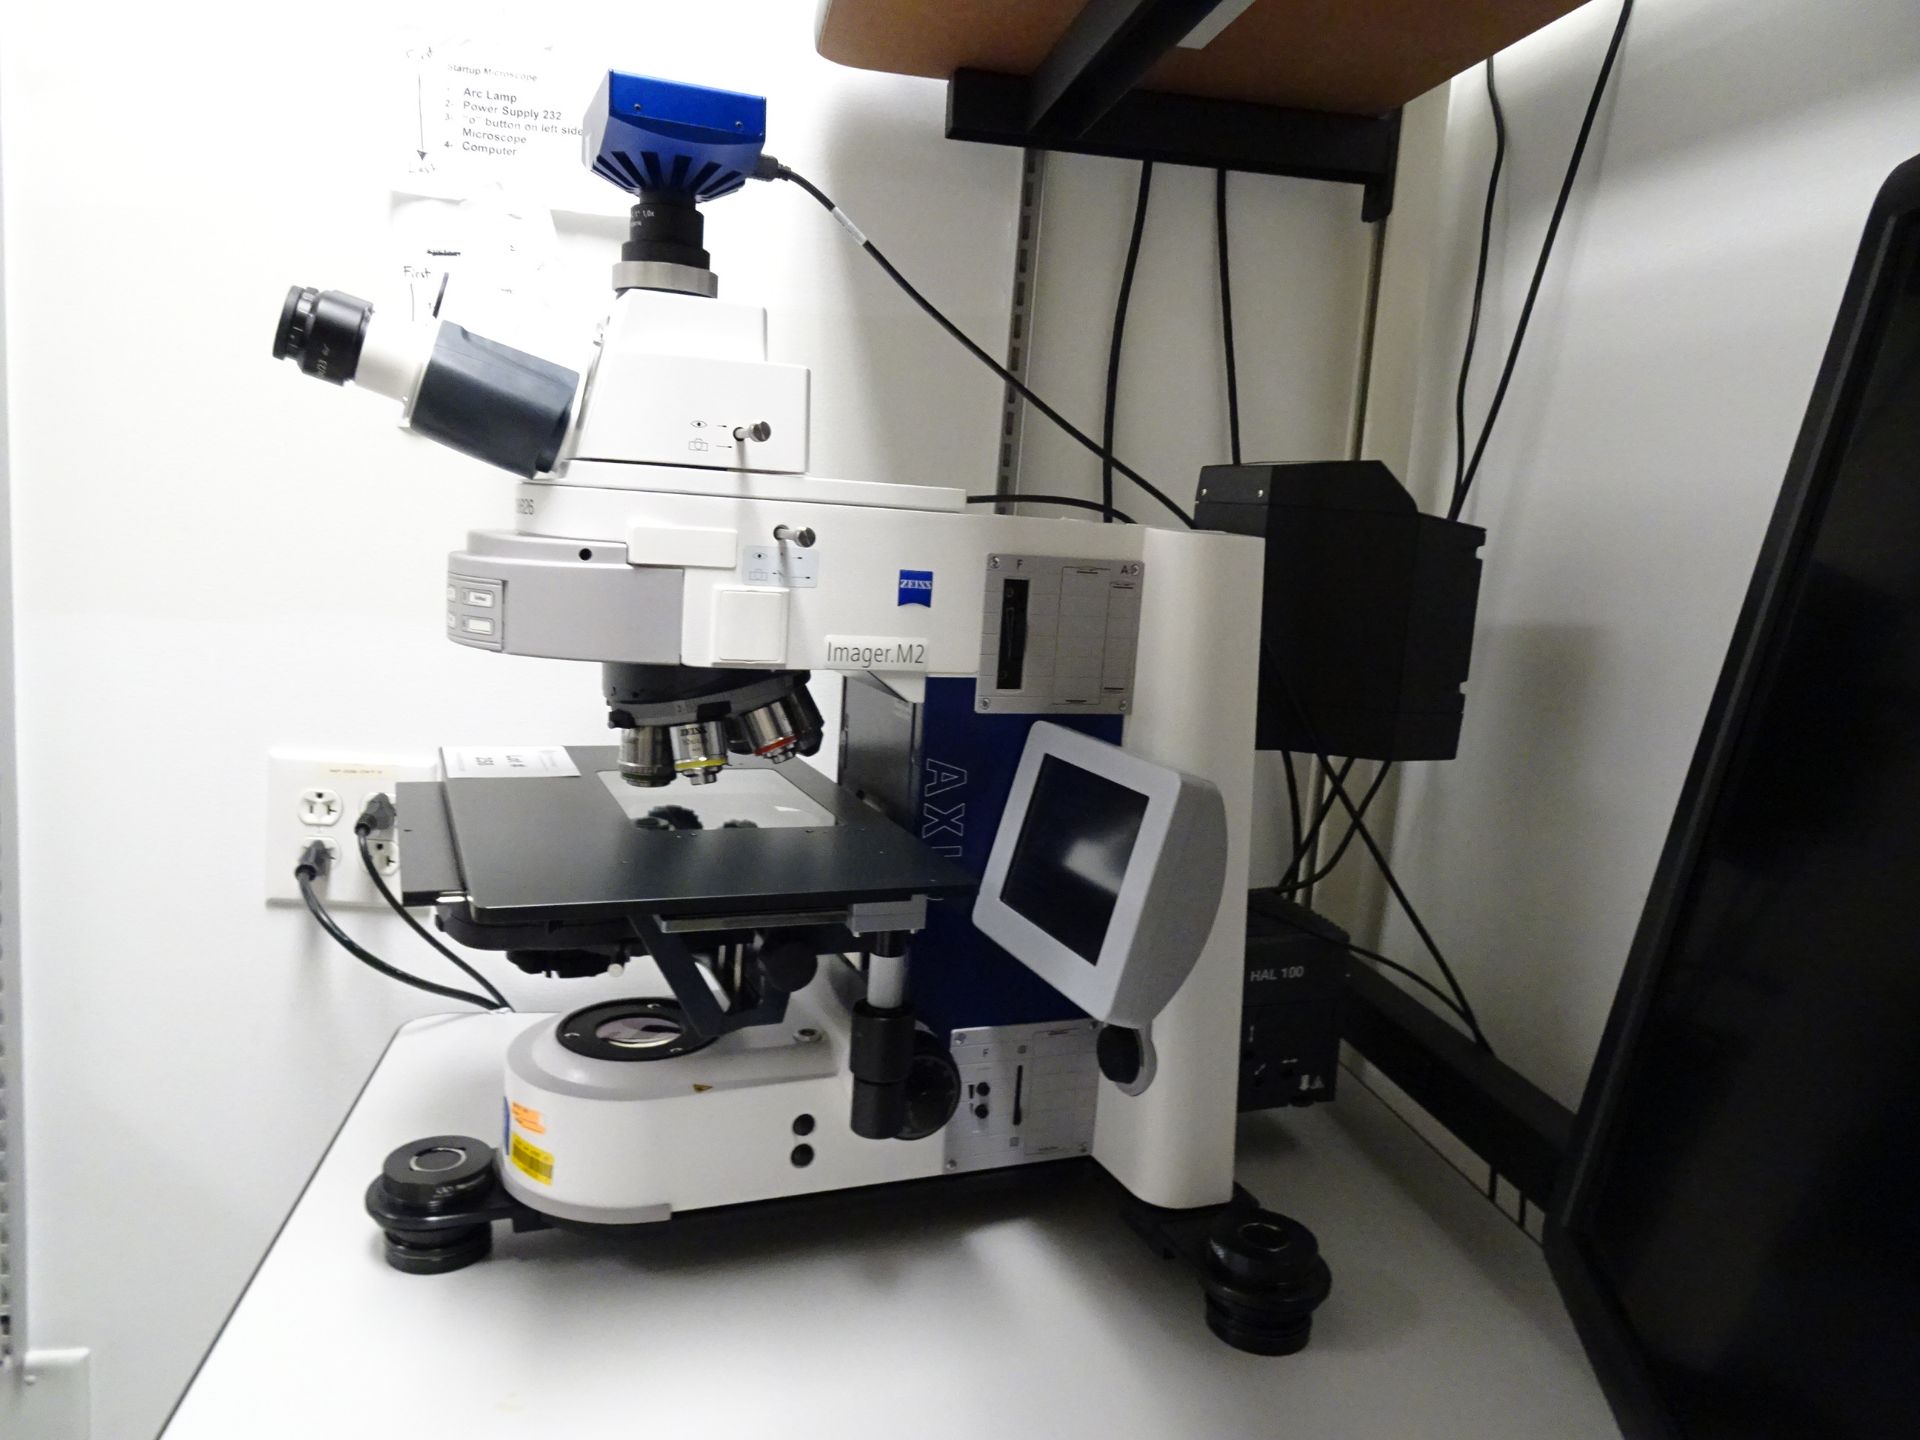 Zeiss Axio Imager.M2 Microscope With AxioCam MRM Camers With 60N-C 1" Camera Adapter, (2) 1PL 10x/23 - Image 3 of 22